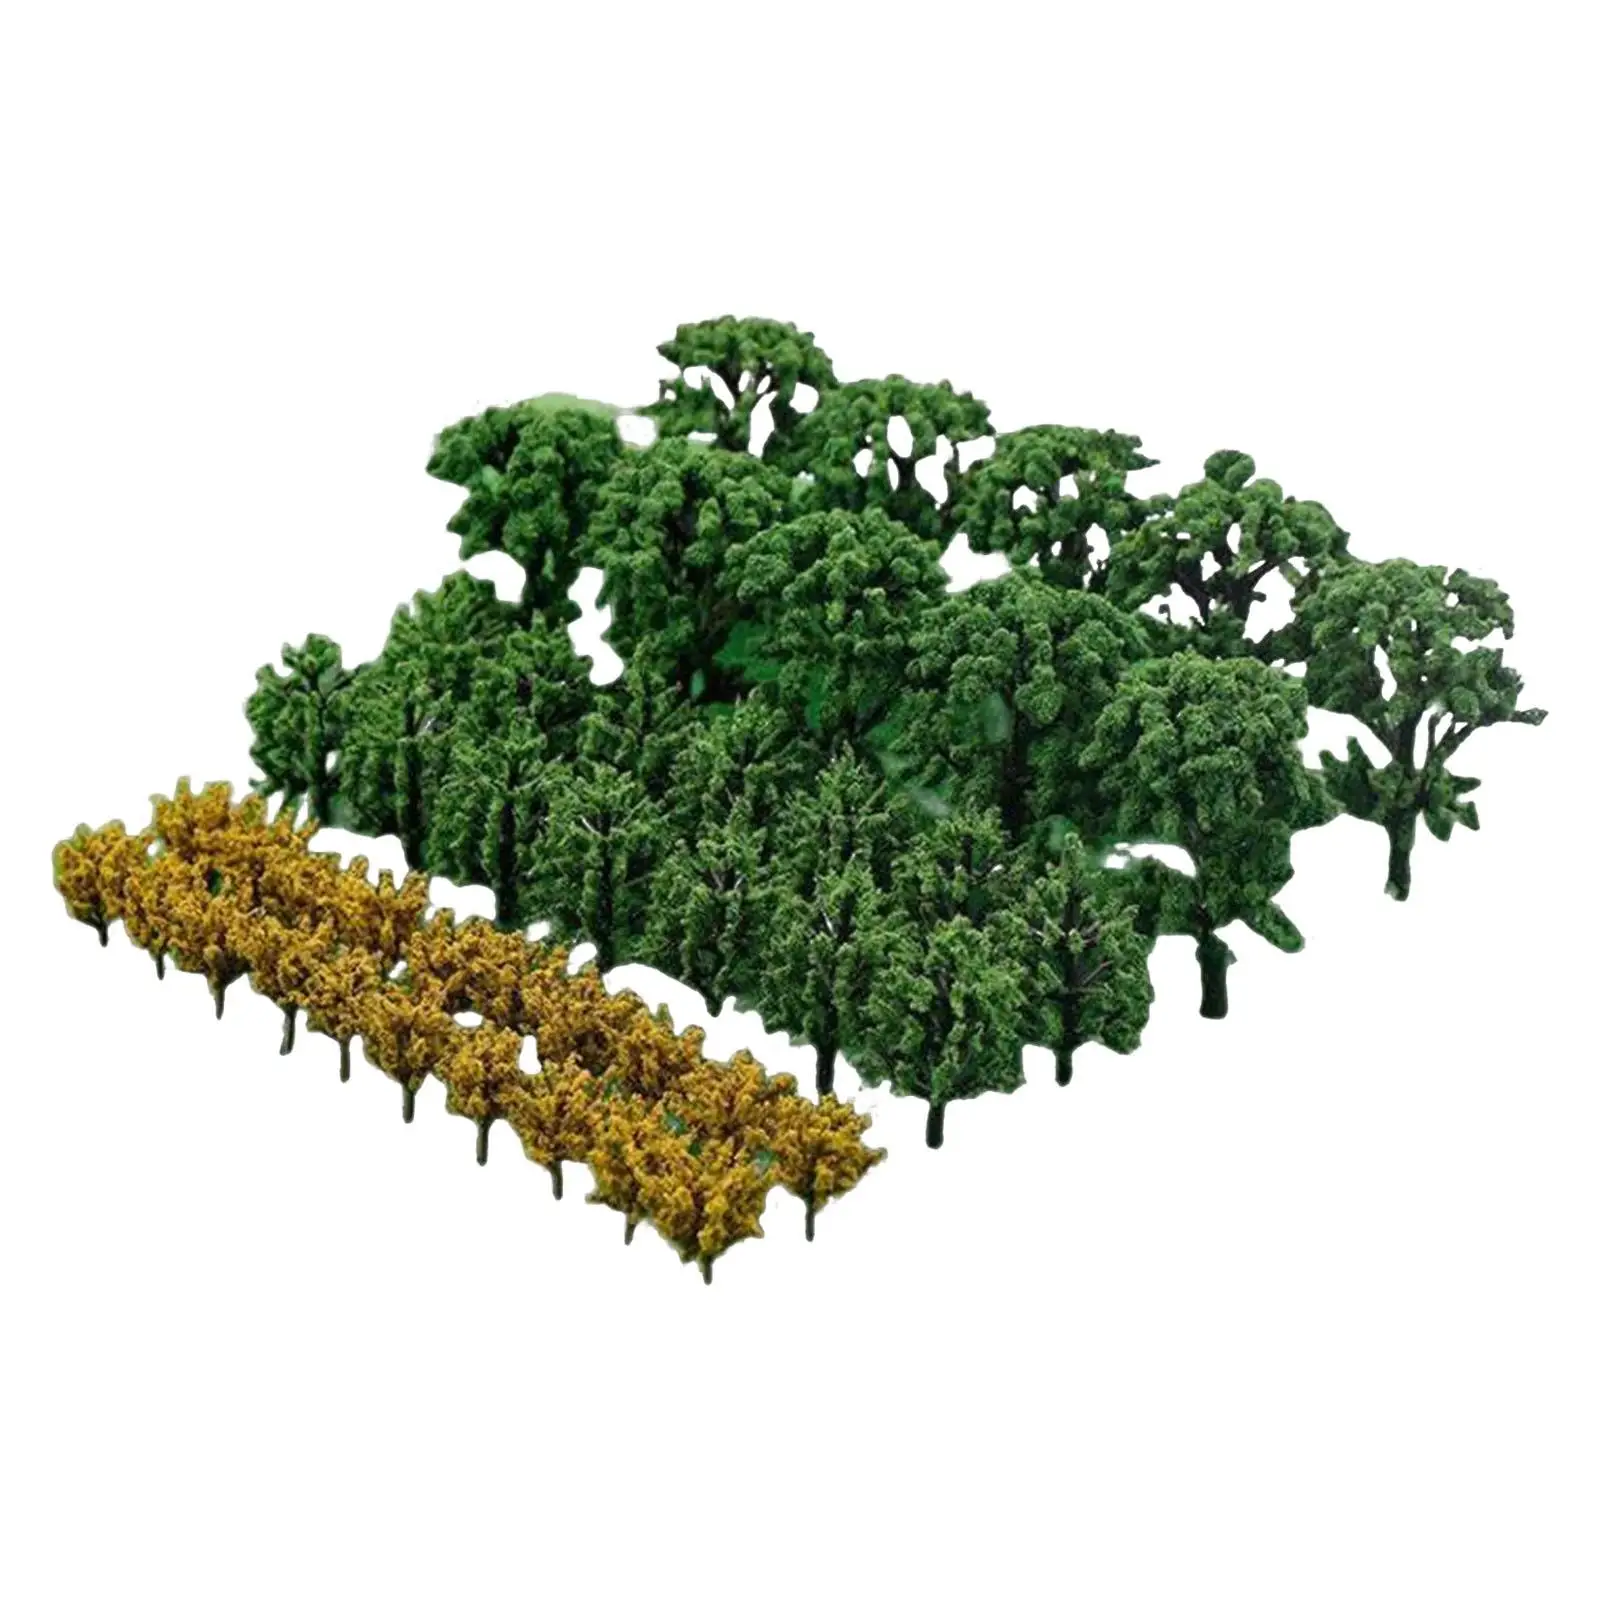 50 Pieces Realistic Scenery Tree Train Scenery Mixed Miniature Trees for Model Train Sand Table Architecture Landscape Diorama